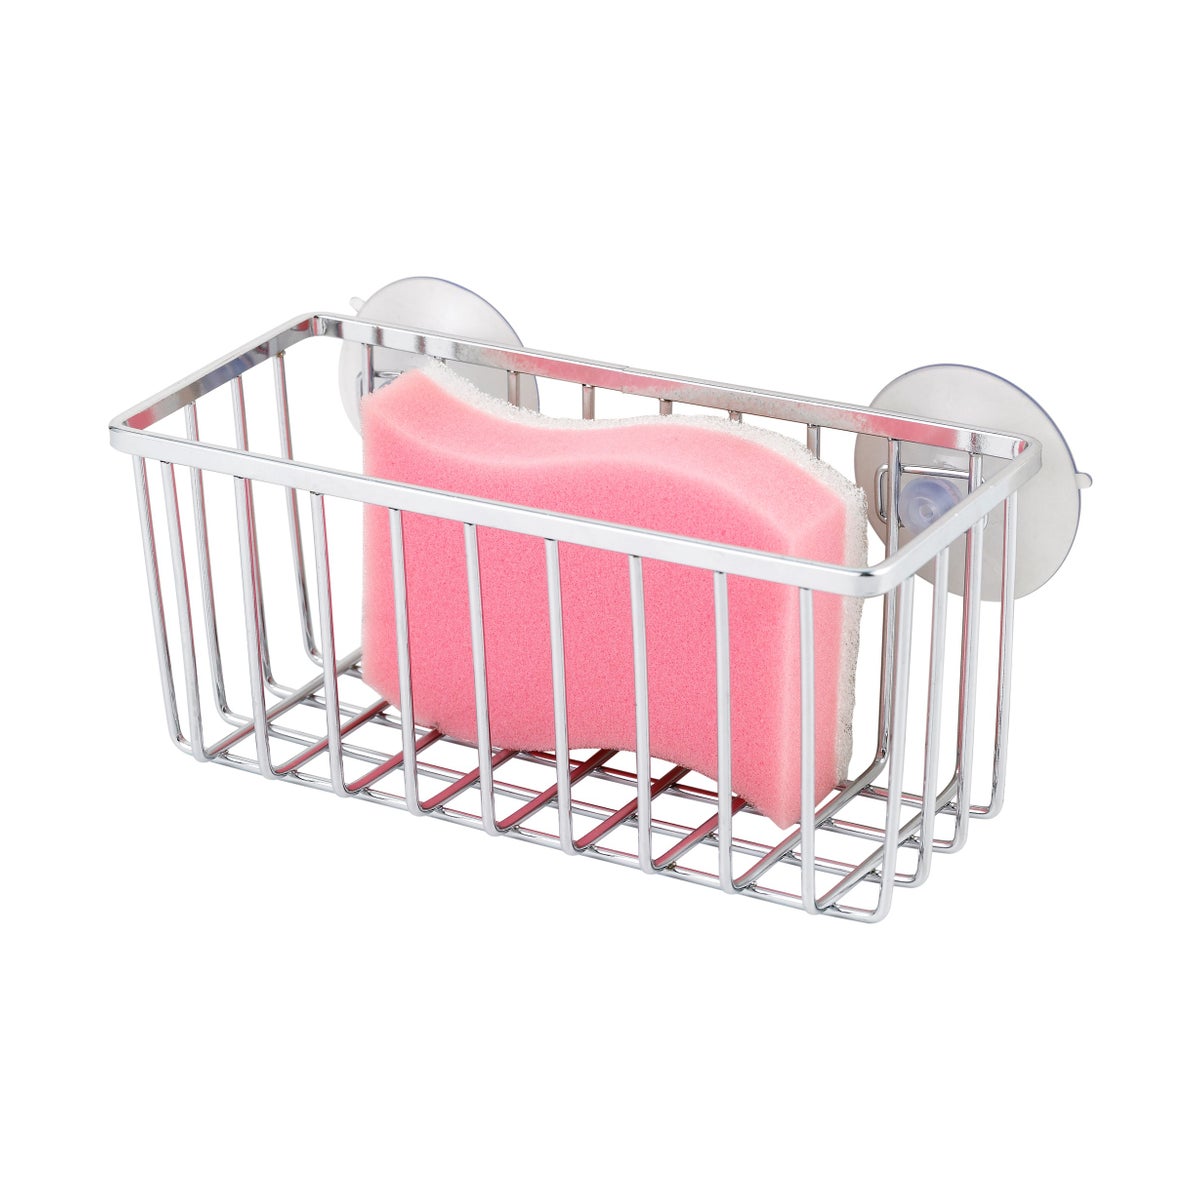 Chrome - Suction Mount Sink Caddy (24)